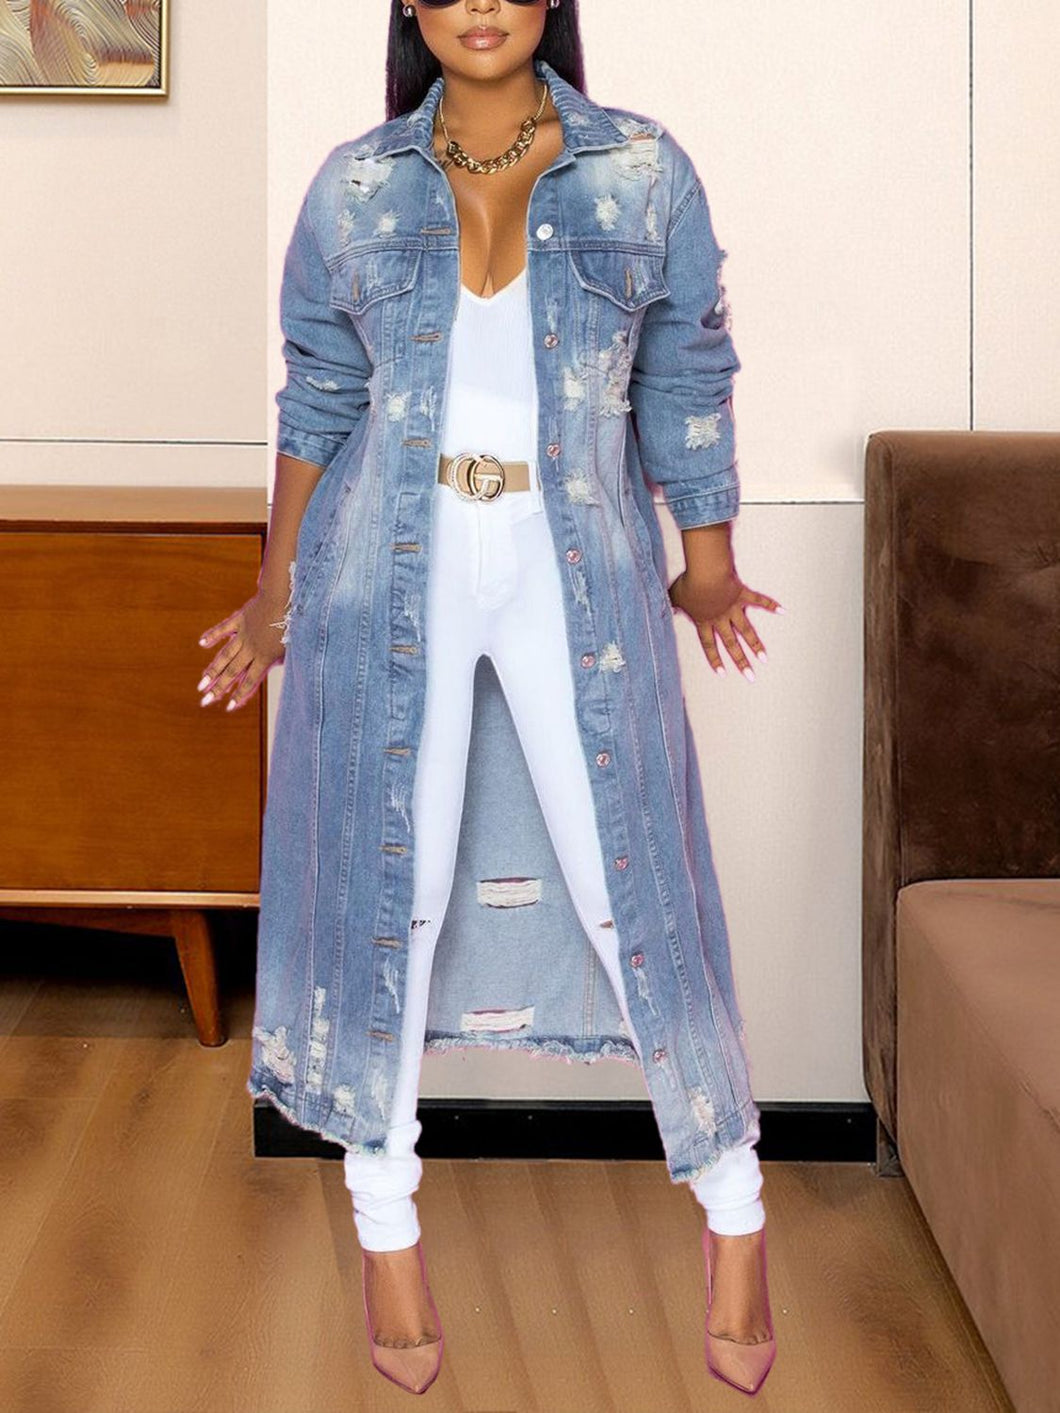 Take your outfit of the day to a whole new level, be sure to gain all the style credentials, regardless of your agenda. Crafted from a light blue denim fabric, with a button-down silhouette and a relaxed fit, this distressed jacket will be sure to captivate all the attention. Elevate your look with this jacket, teamed with a denim skirt, clear heels, and gold hoop earrings - a combination that we simply adore.